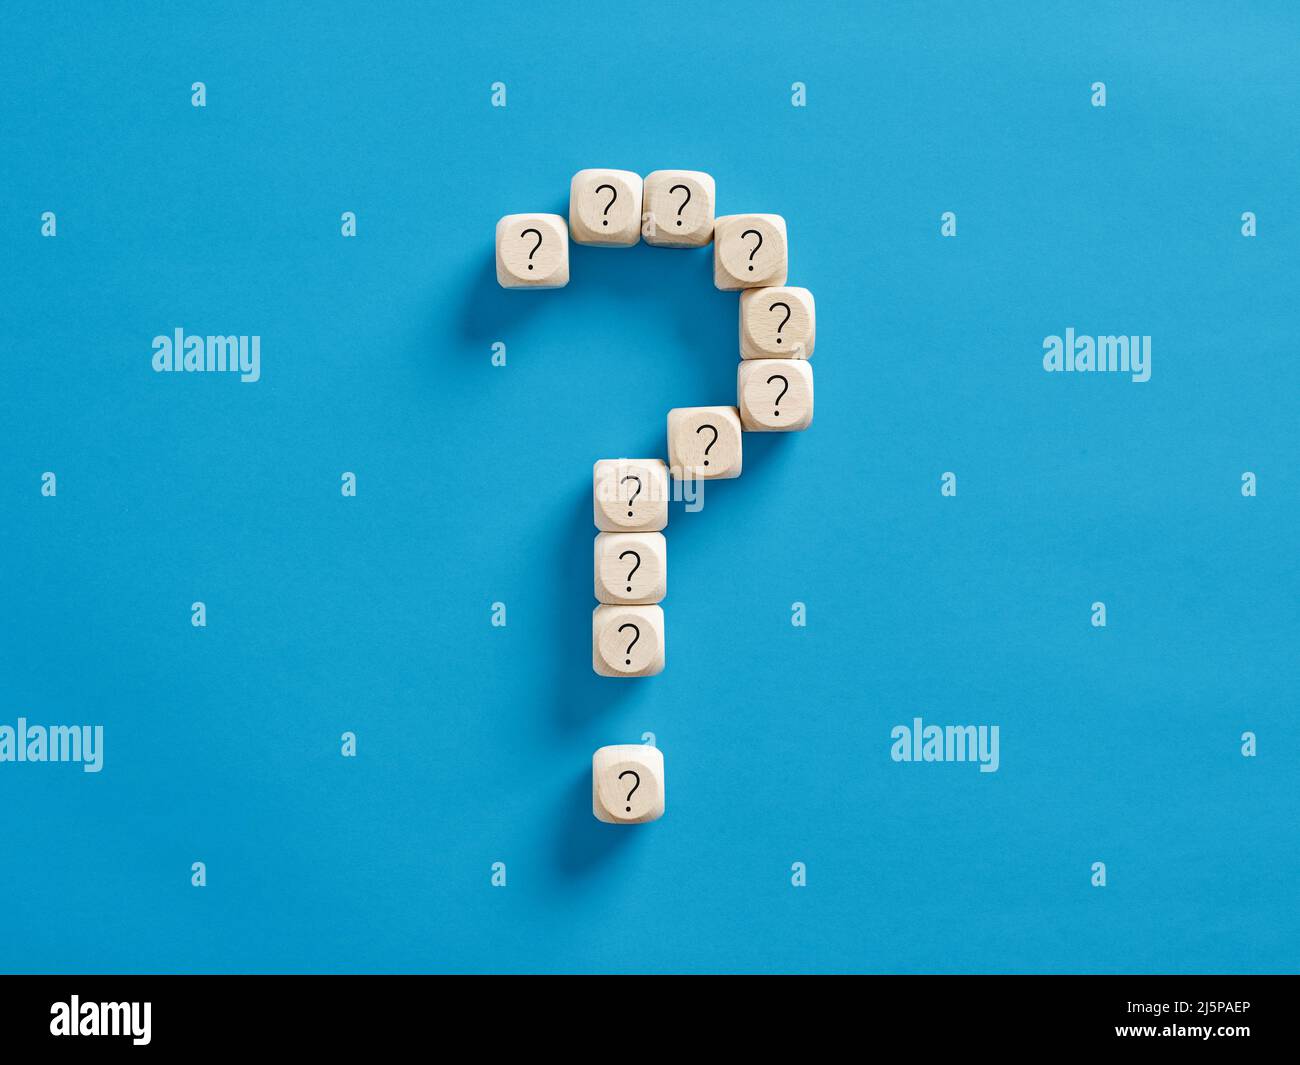 Question mark symbol made with wooden cubes. Stock Photo